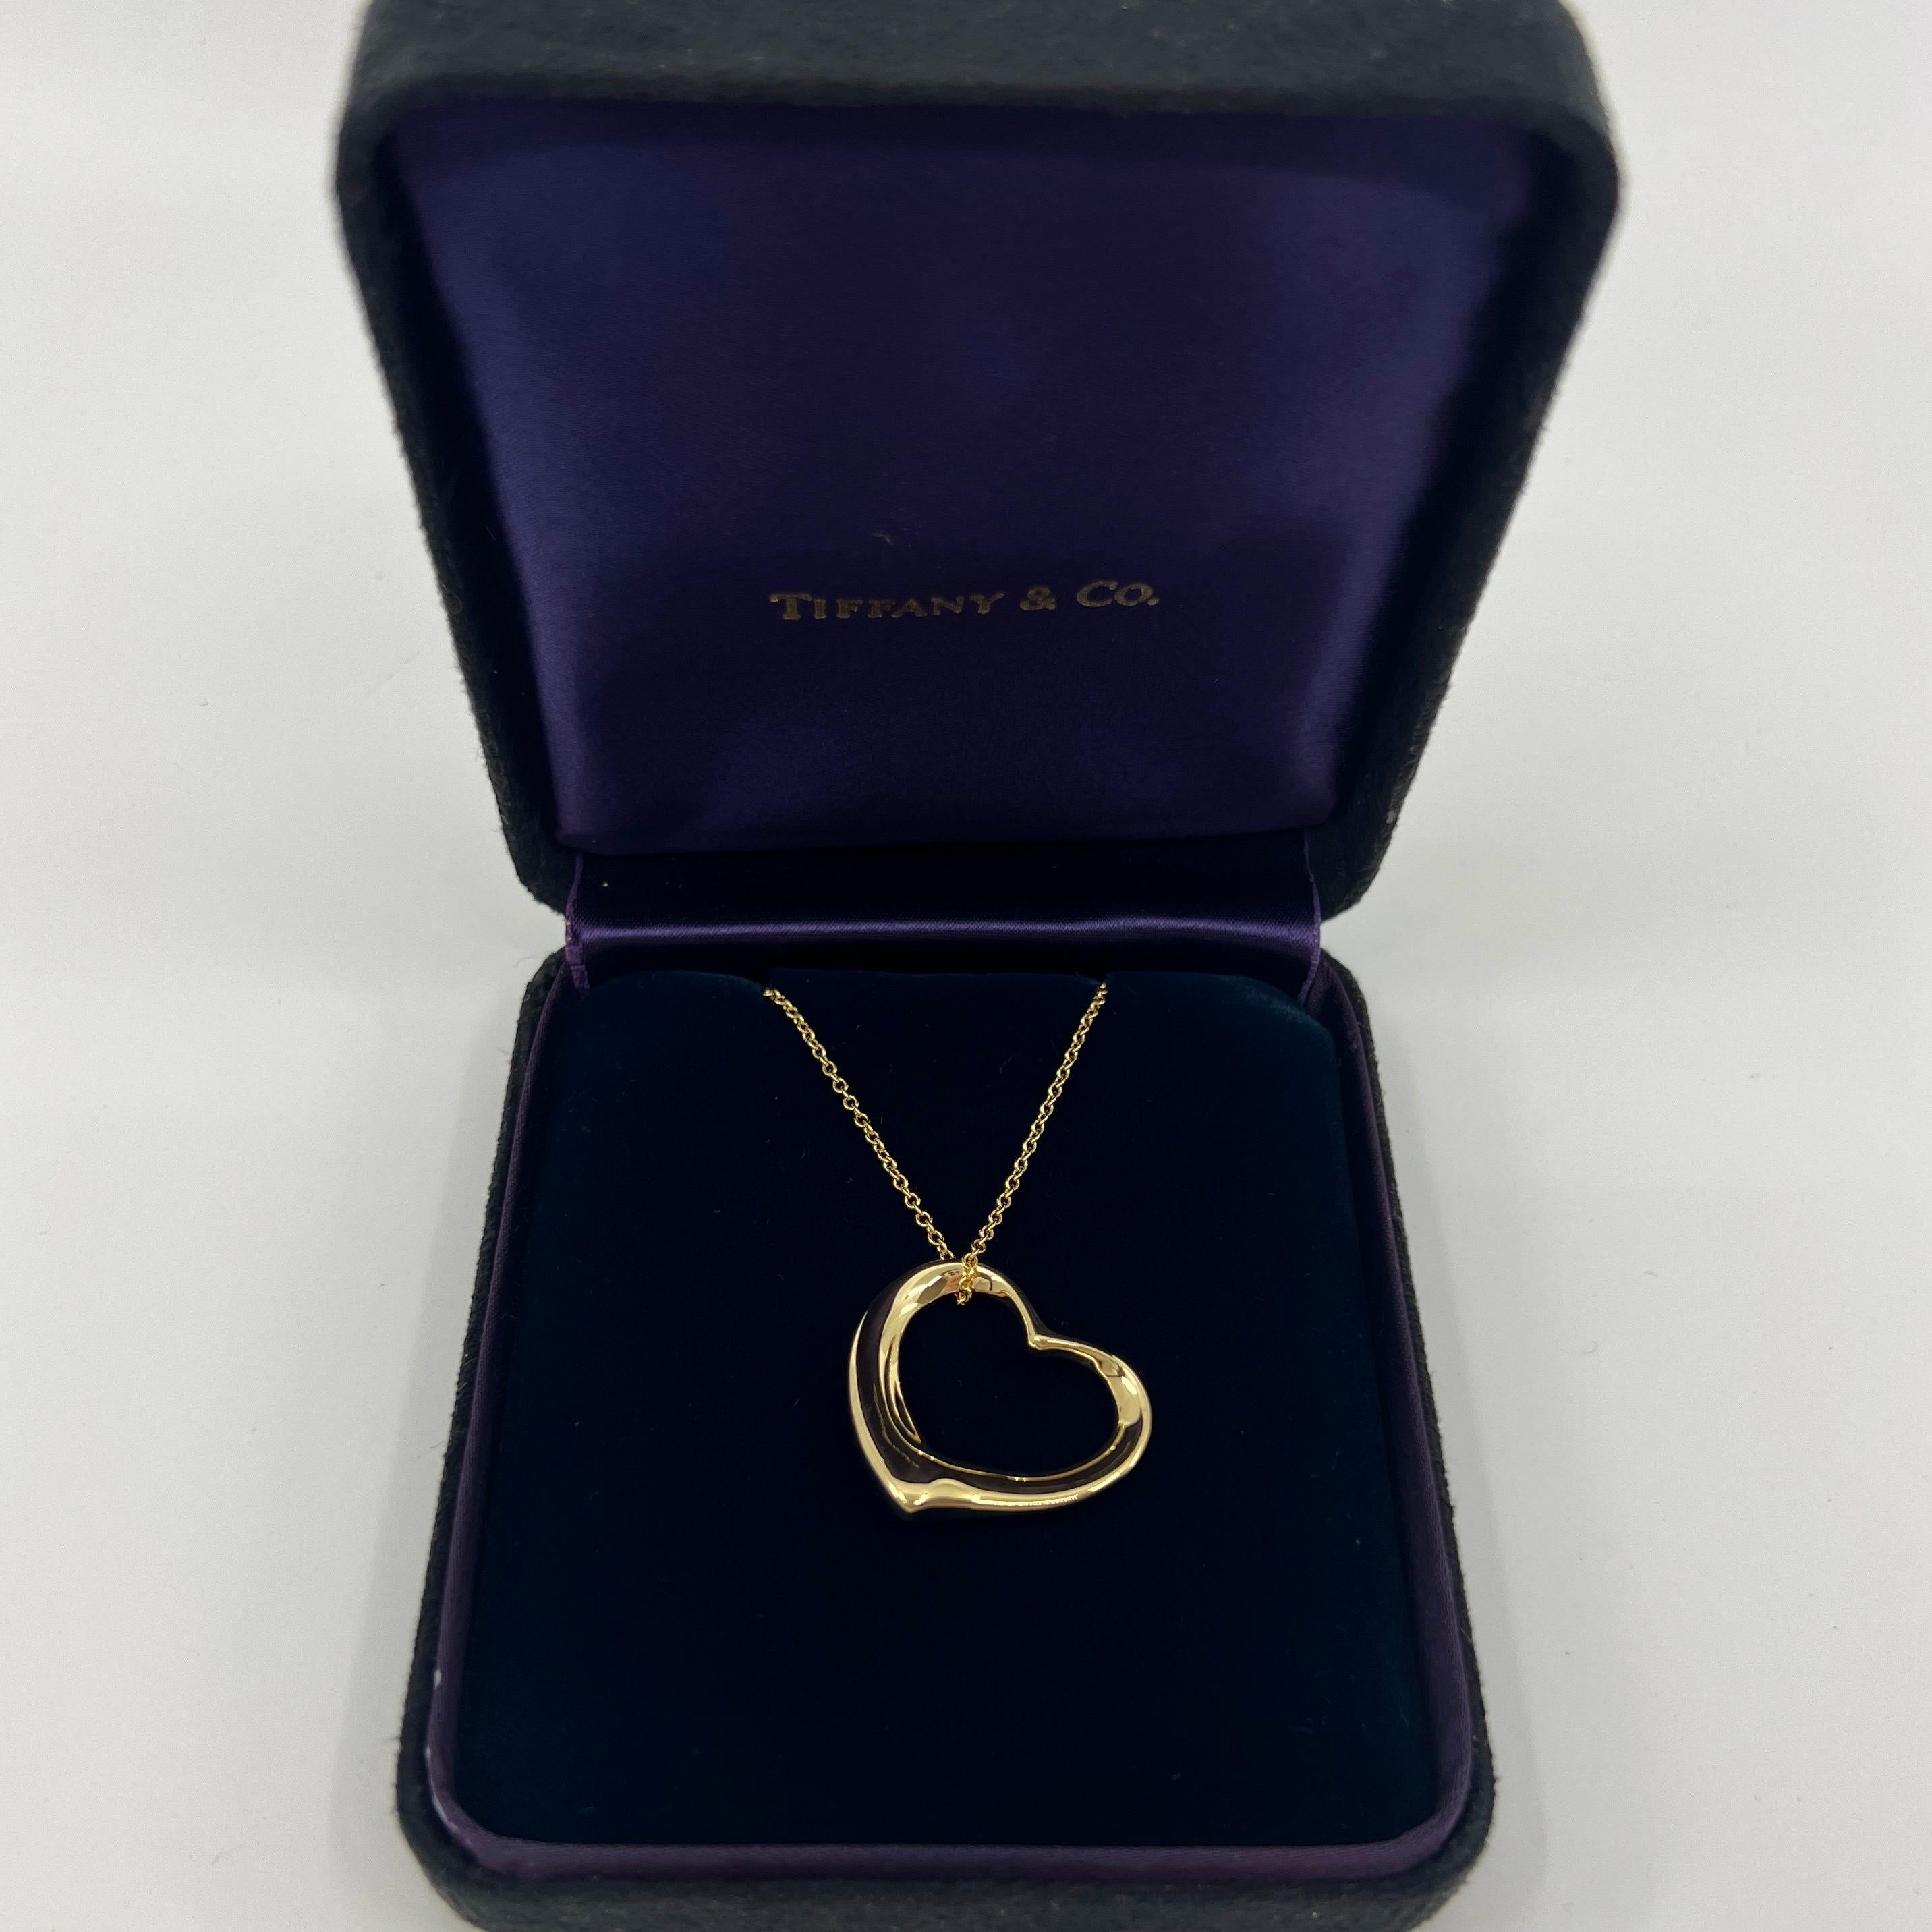 Tiffany & Co. Elsa Peretti Extra Large Open Heart 18k Gold Pendant Necklace For Sale 2